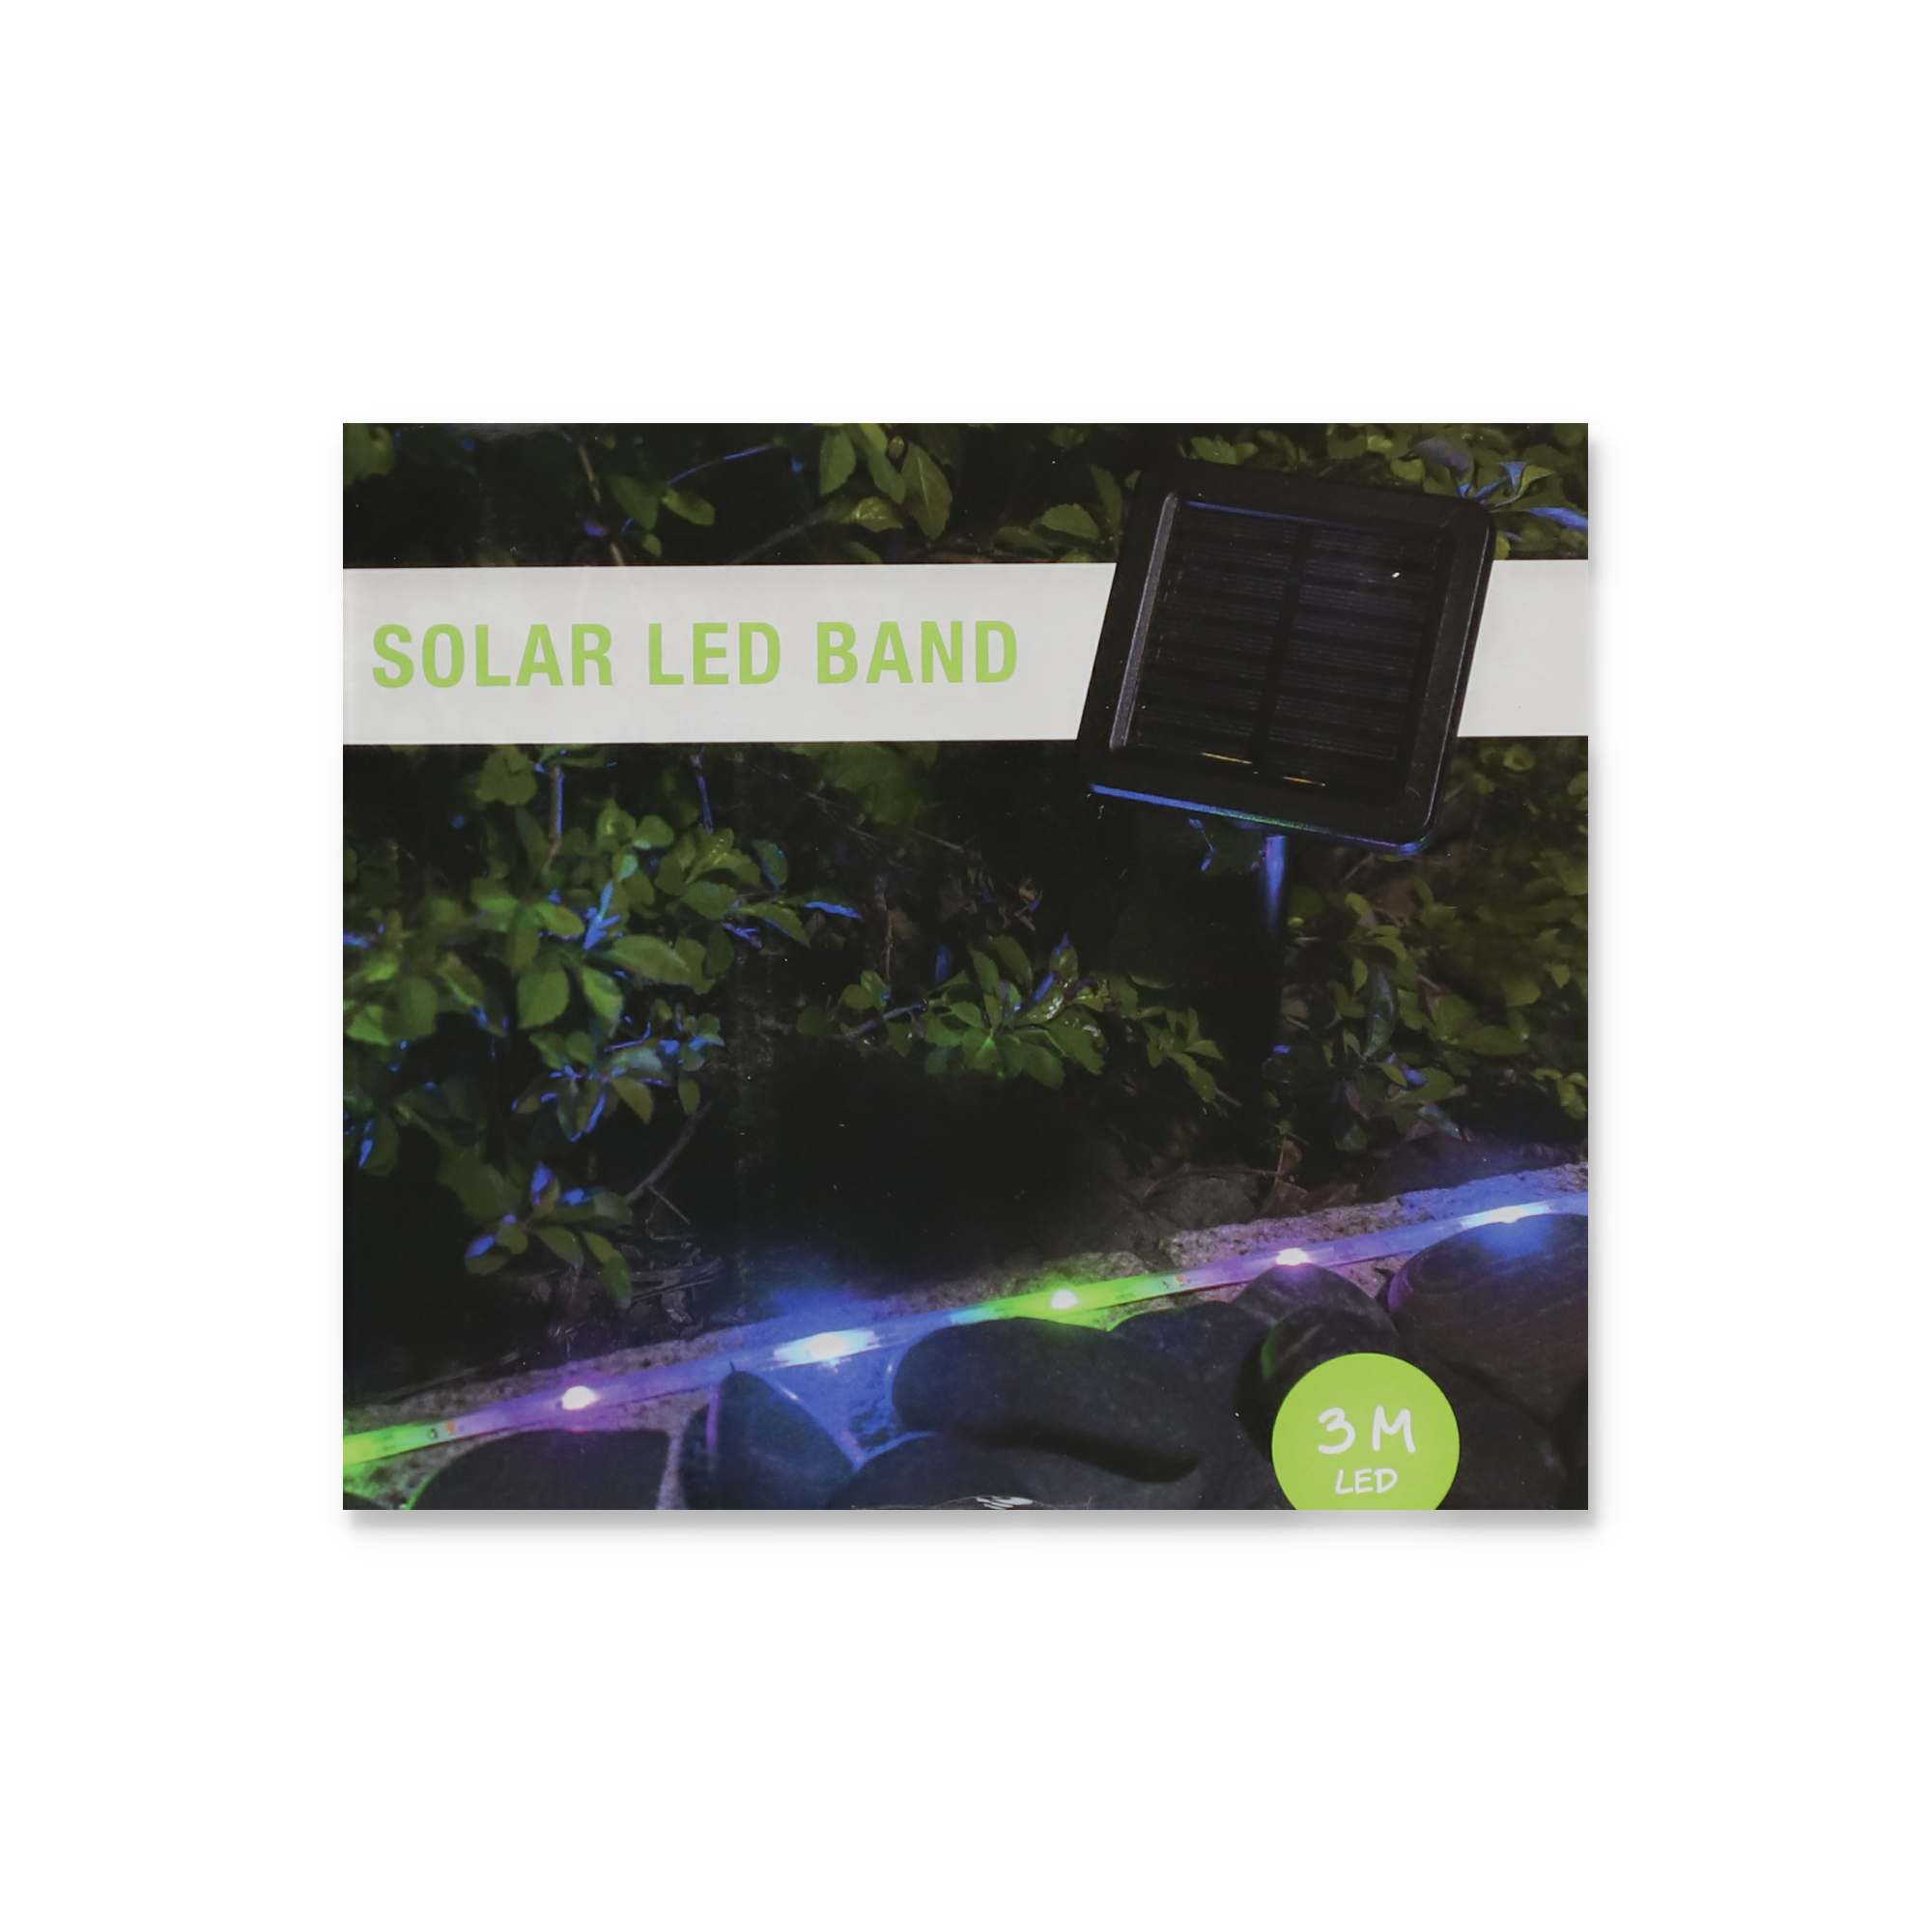 Solar-LED-Band mehrfarbig 3 m + product picture